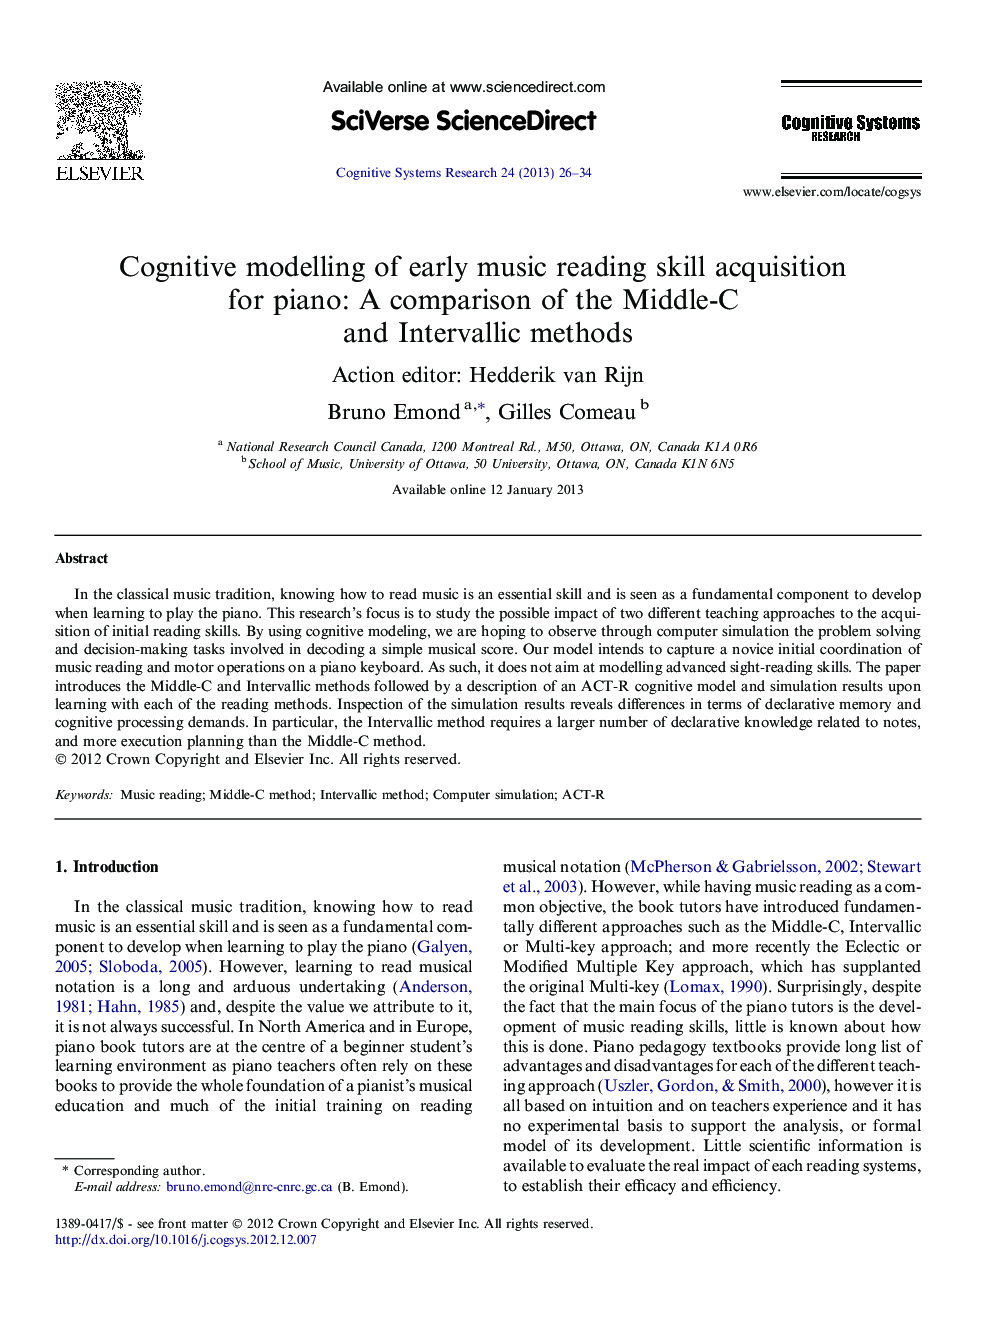 Cognitive modelling of early music reading skill acquisition for piano: A comparison of the Middle-C and Intervallic methods